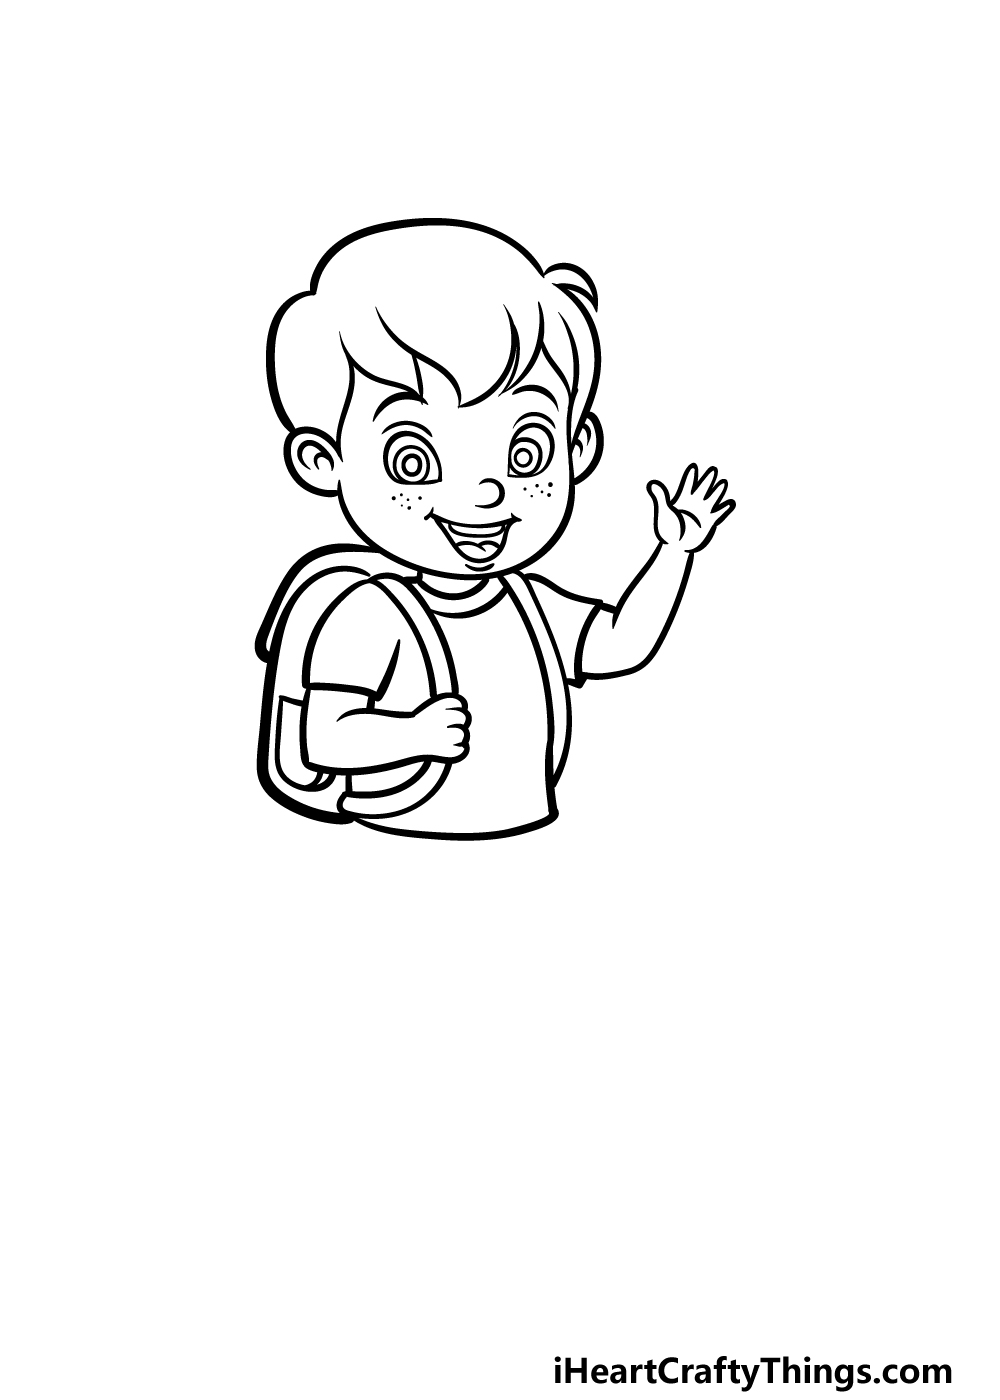 Vector Monochrome Line Drawing. Cute Little Boy Goes To School In School  Uniform With Backpack Royalty Free SVG, Cliparts, Vectors, and Stock  Illustration. Image 157856555.